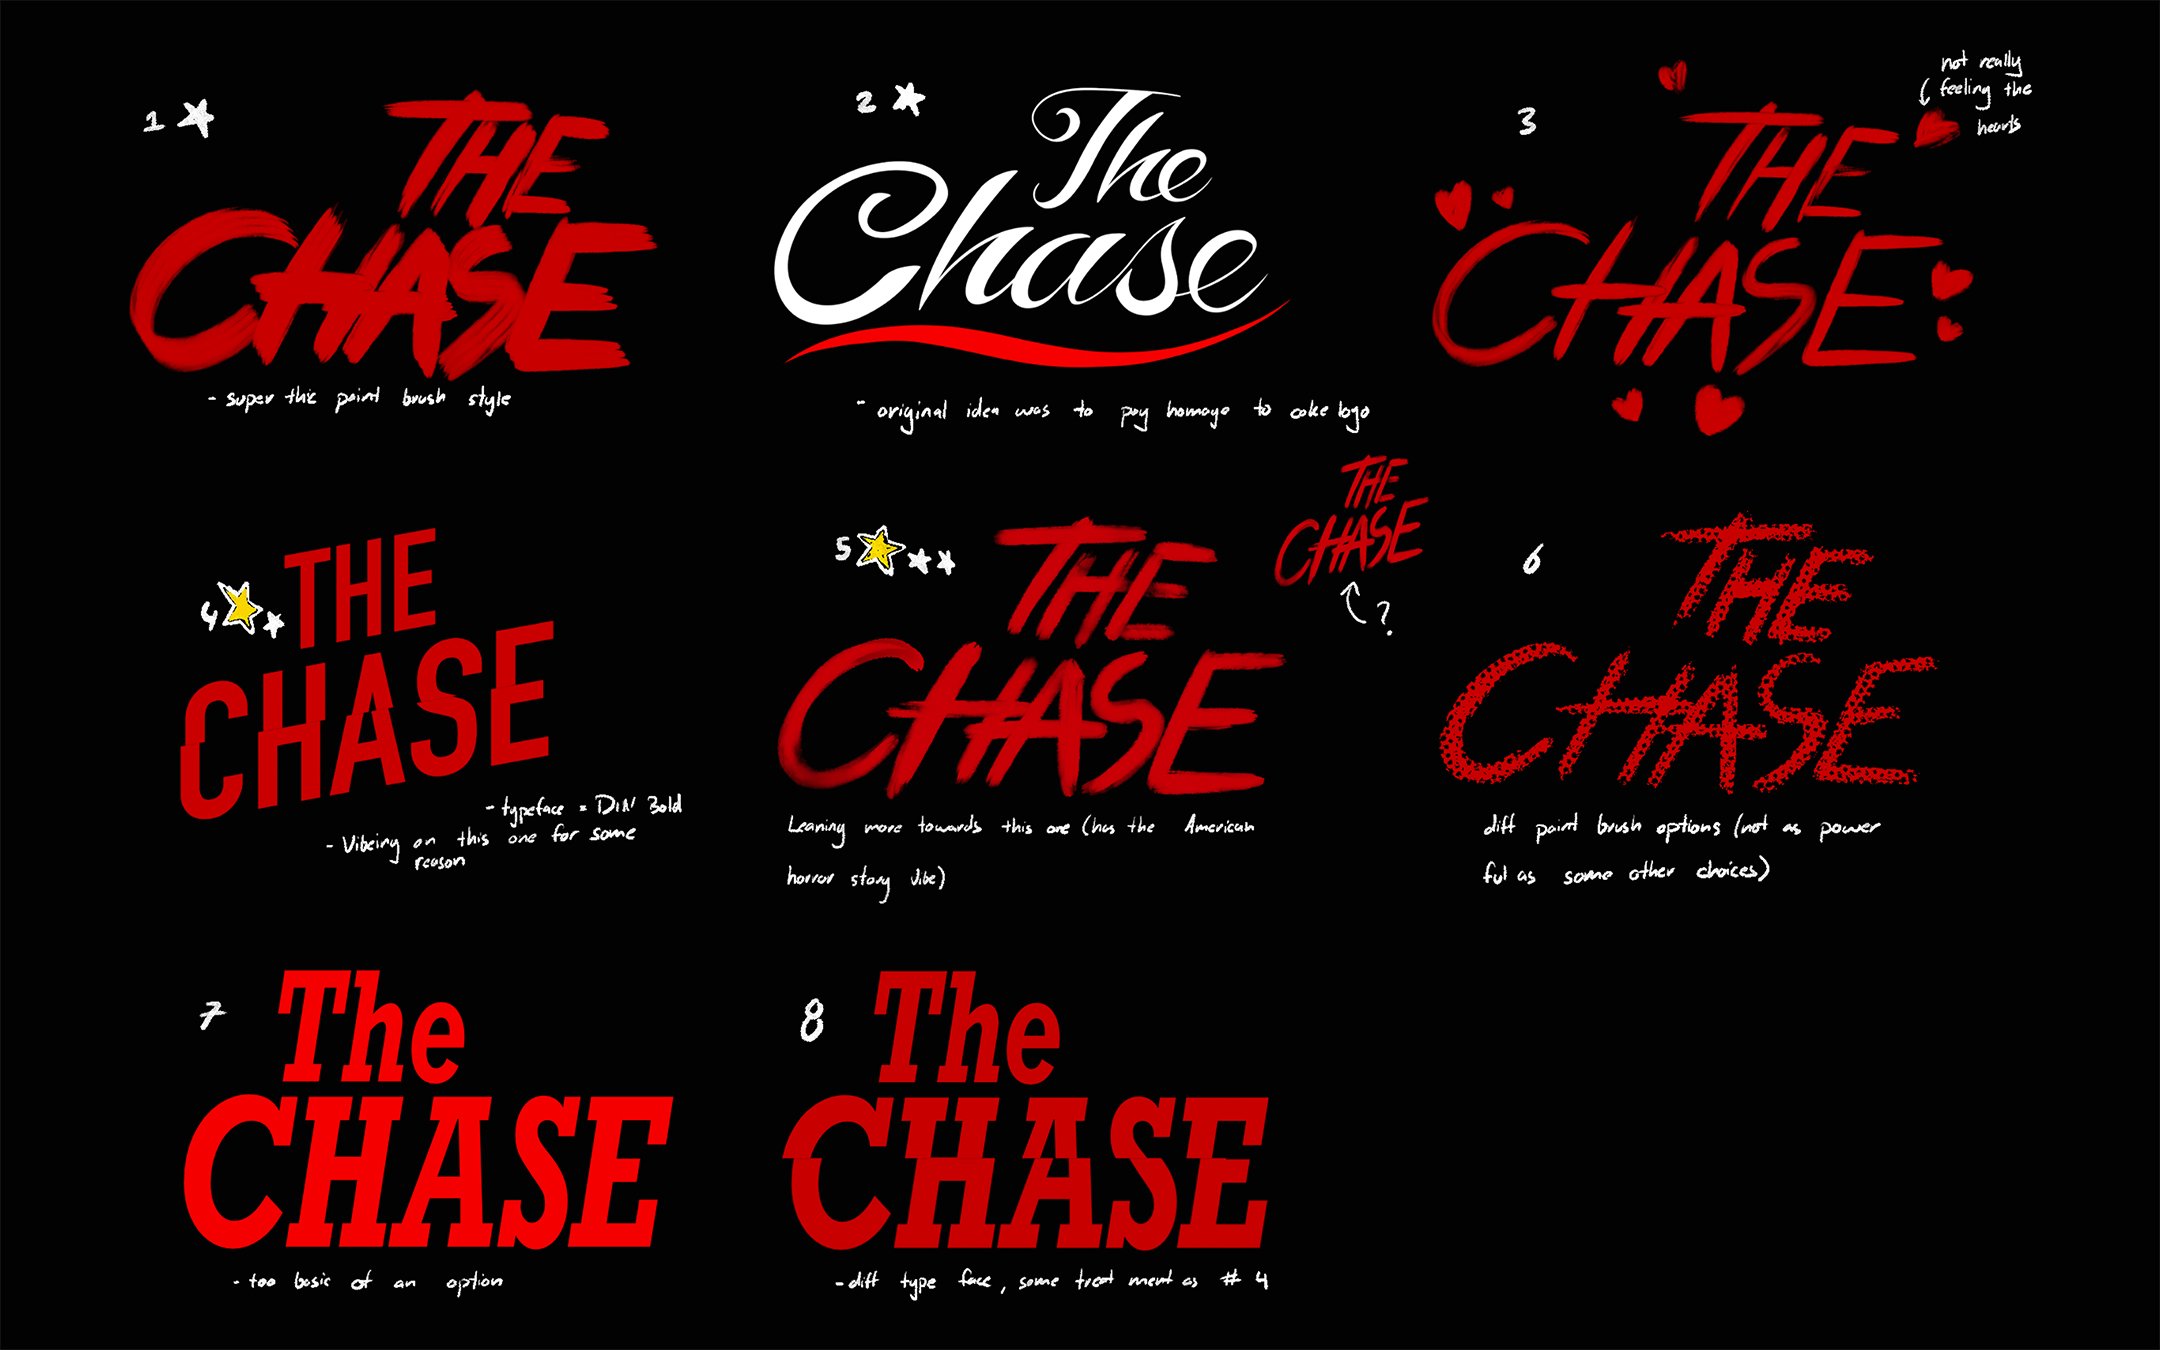 The Chase IG_7.jpg